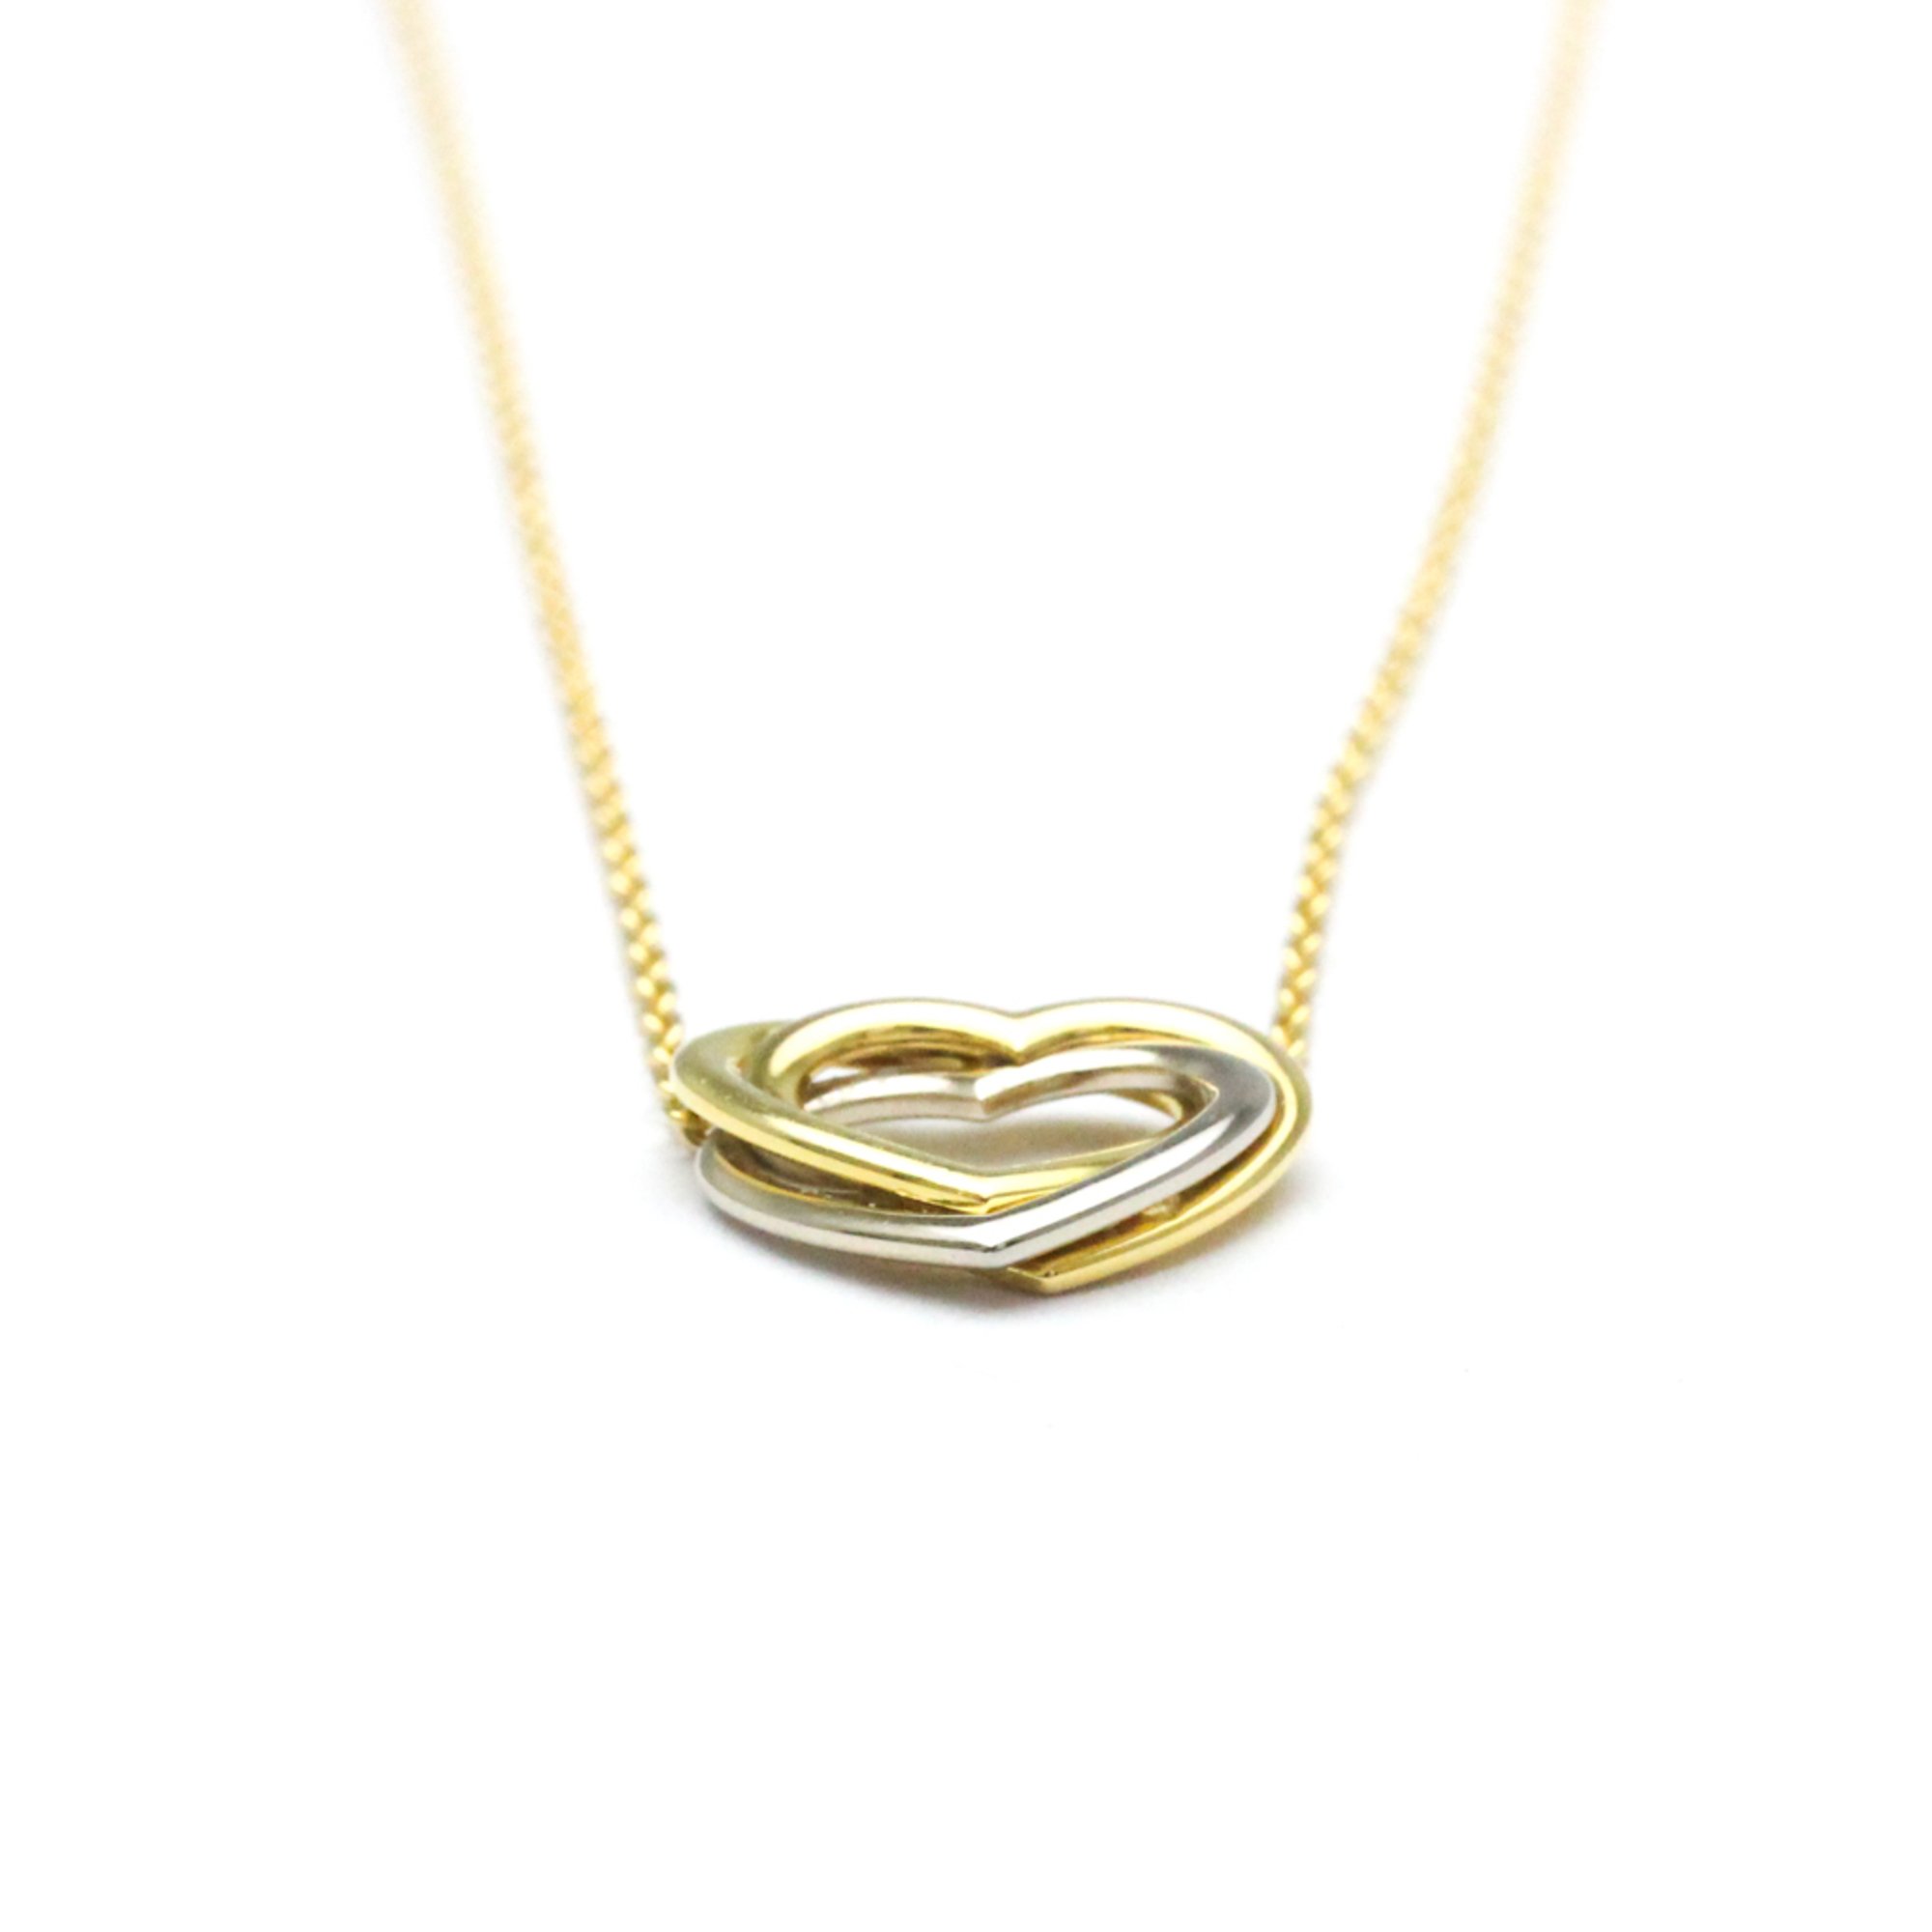 Cartier Trinity Heart Necklace Pink Gold (18K),White Gold (18K),Yellow Gold (18K) No Stone Men,Women Fashion Pendant Necklace (Gold)